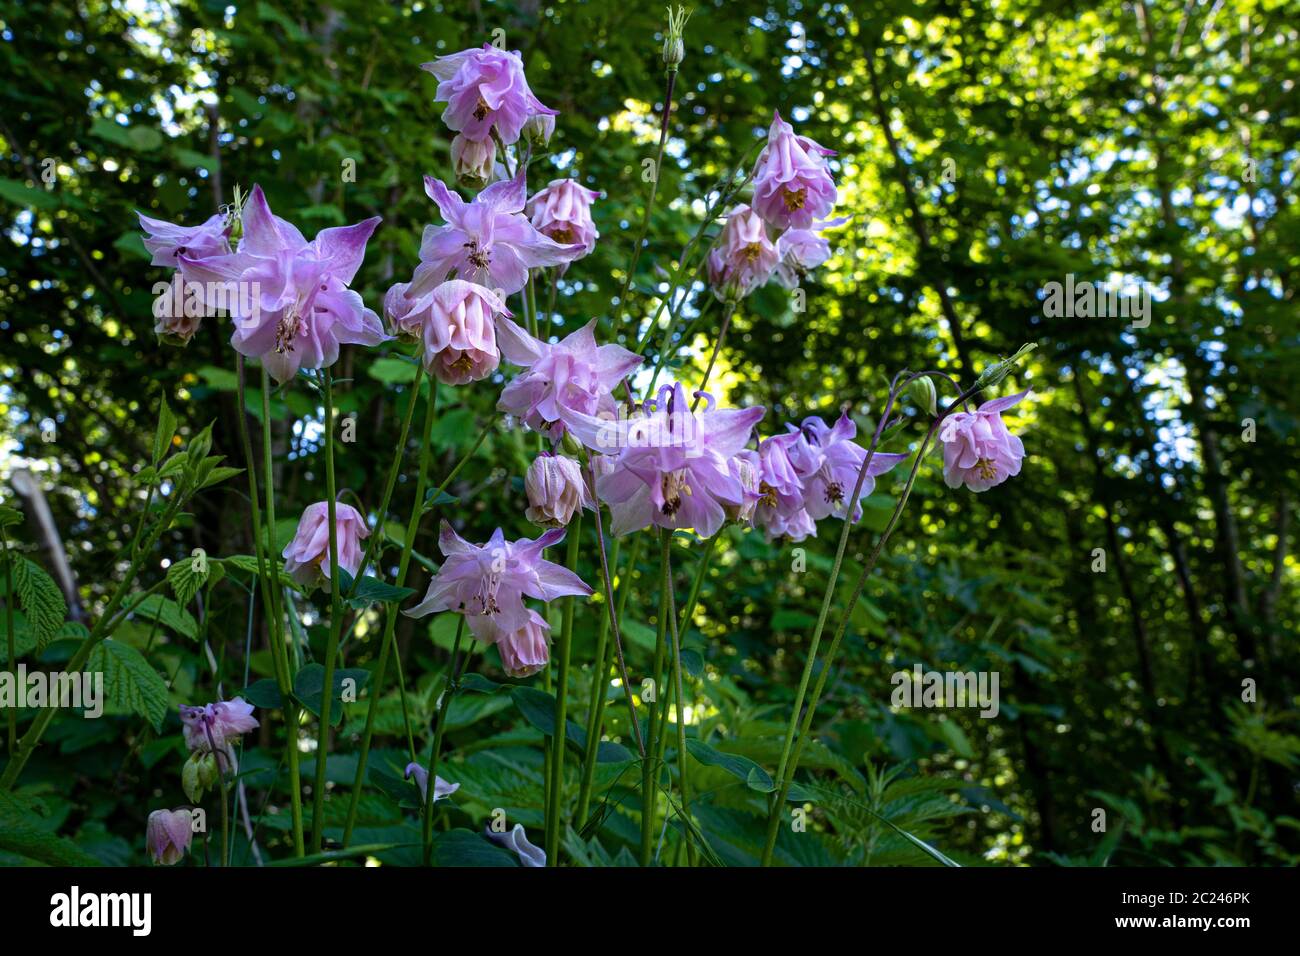 Wild flower with lilac pink blossoms in the forest - Aquilegia vulgaris - common columbine Stock Photo